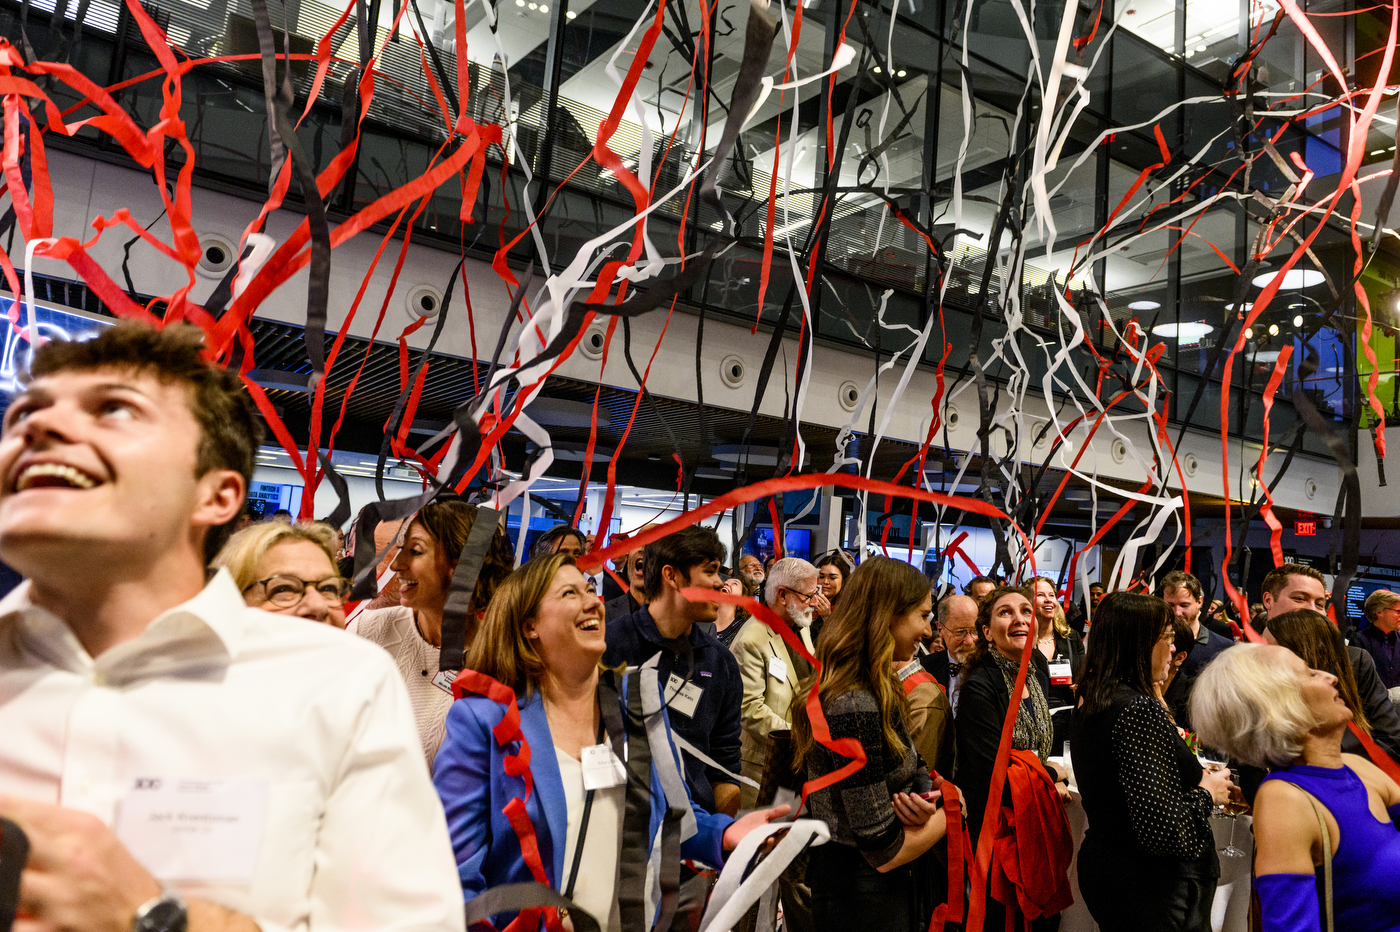 streamers falling onto audience at D'Amore McKim's 100th Anniversary event